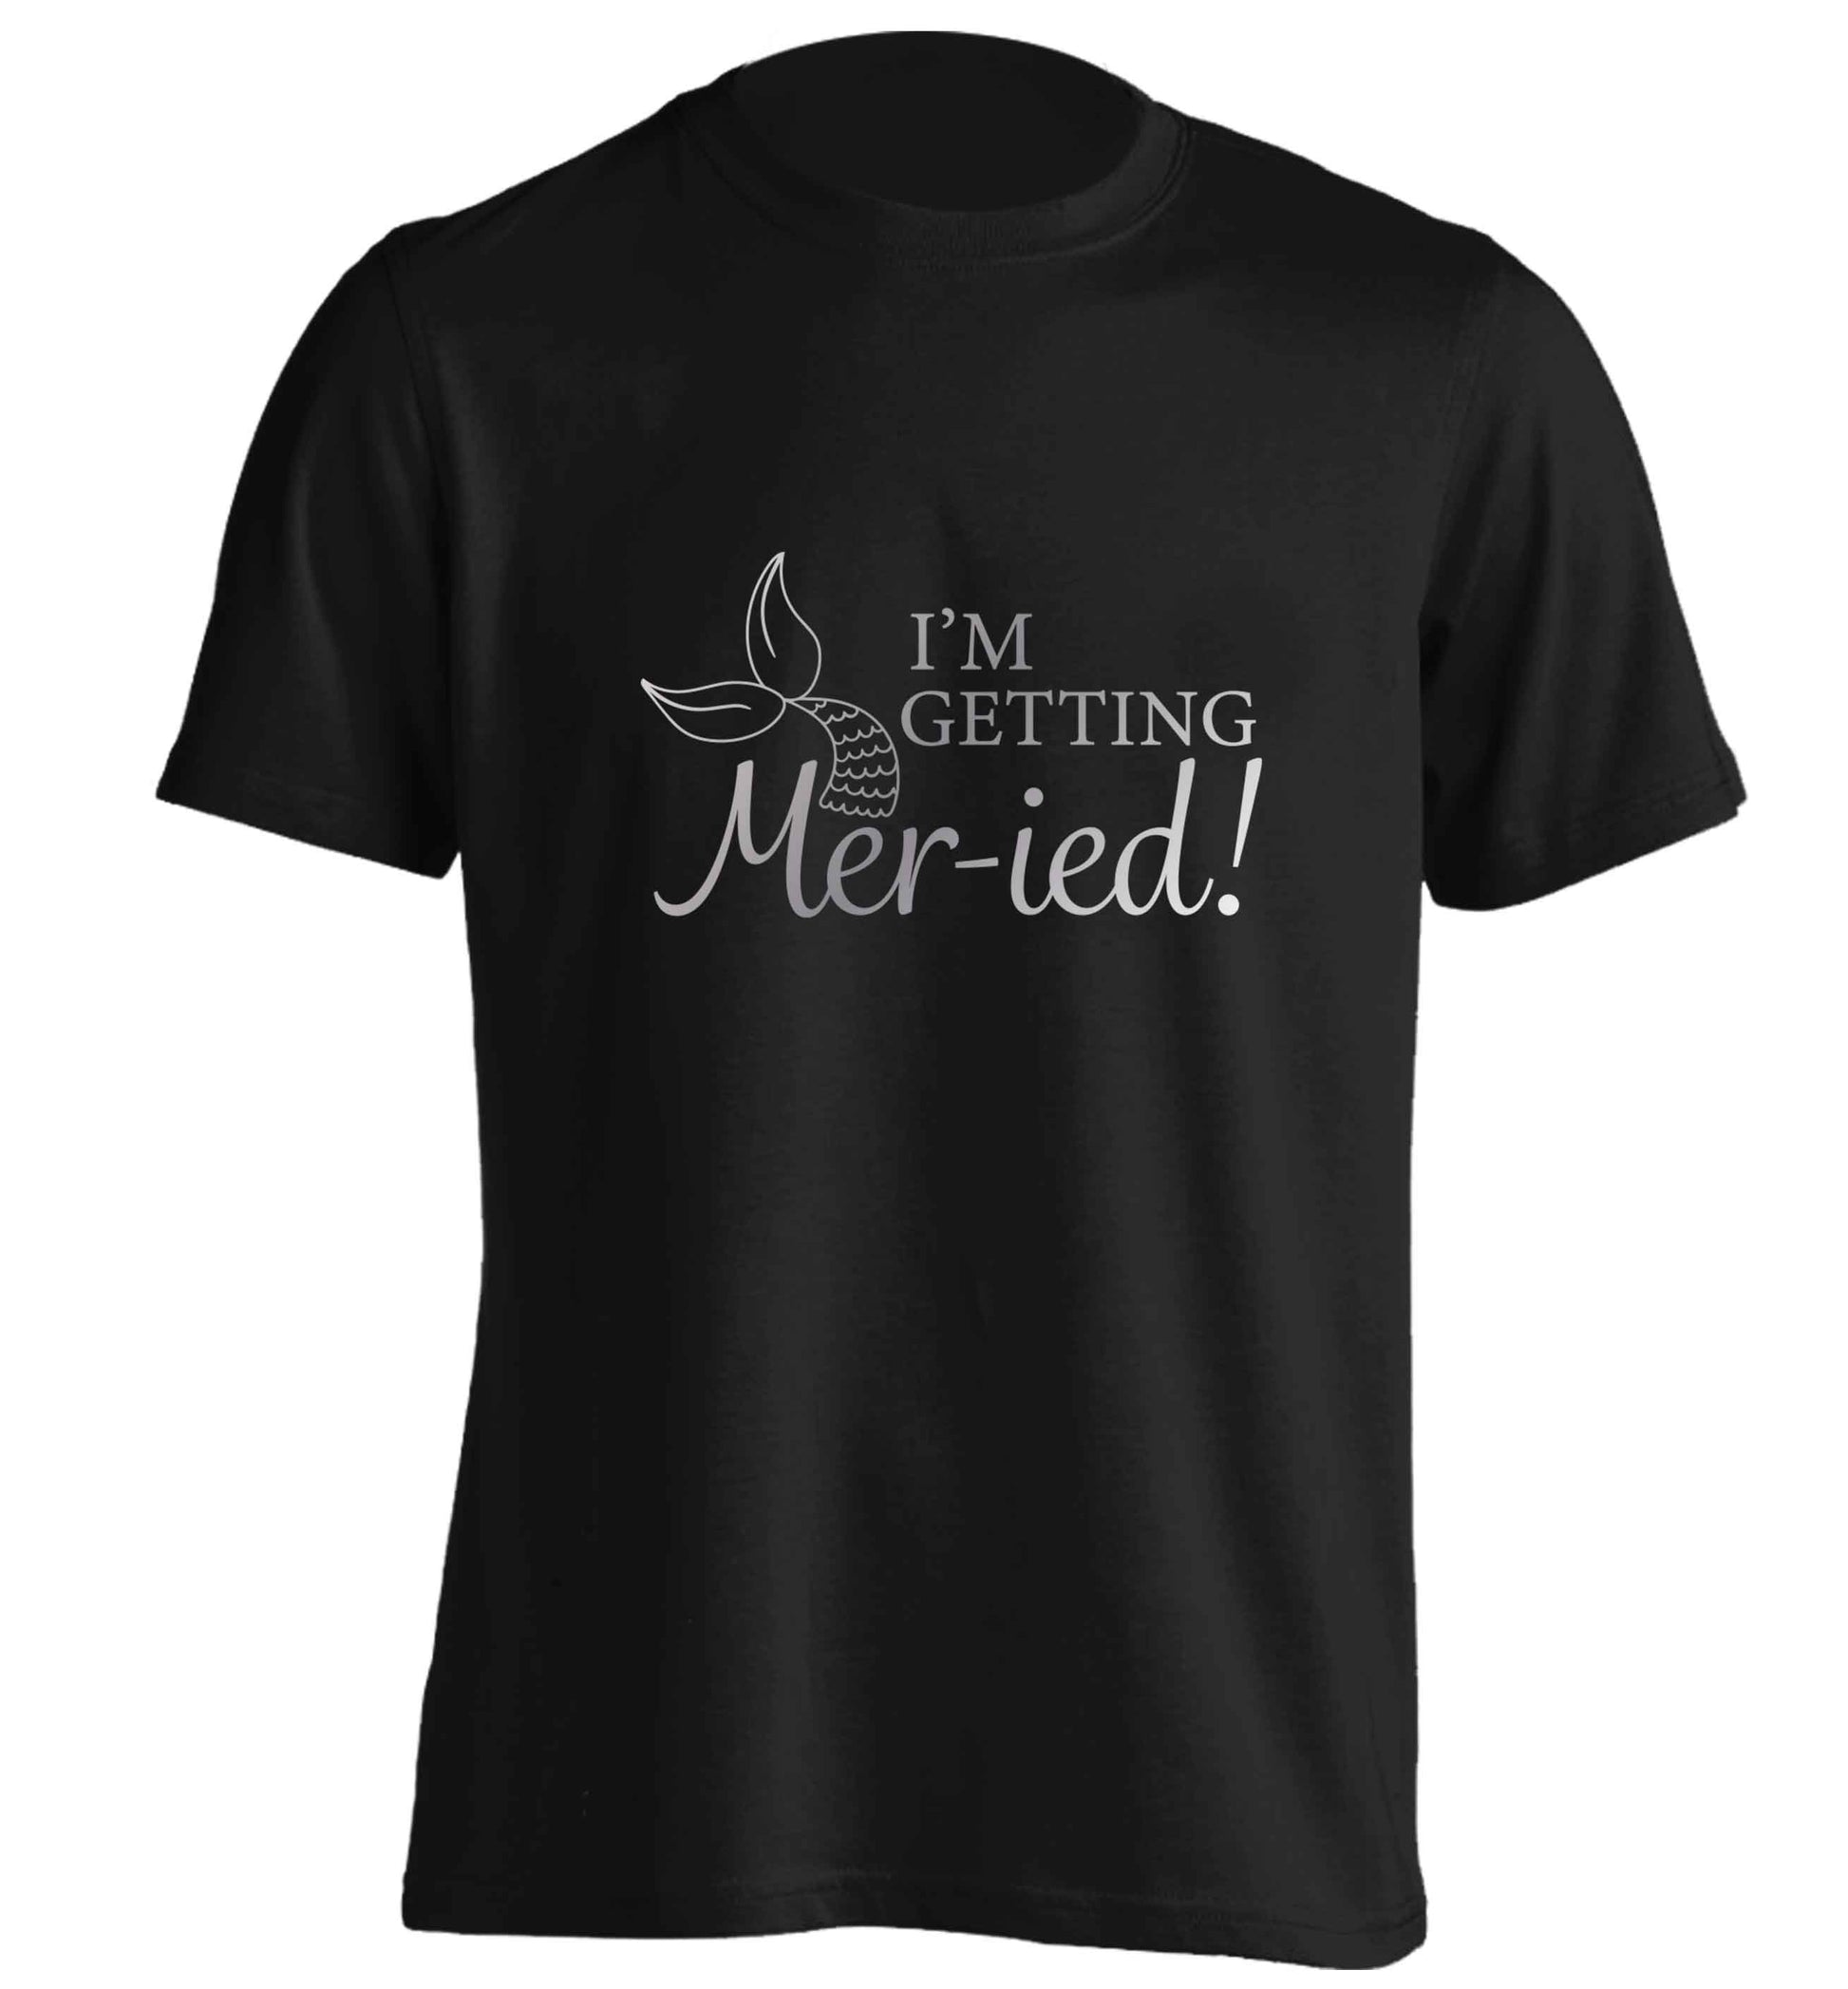 Personalised wedding thank you's Mr and Mrs wedding and date! Ideal wedding favours! adults unisex black Tshirt 2XL